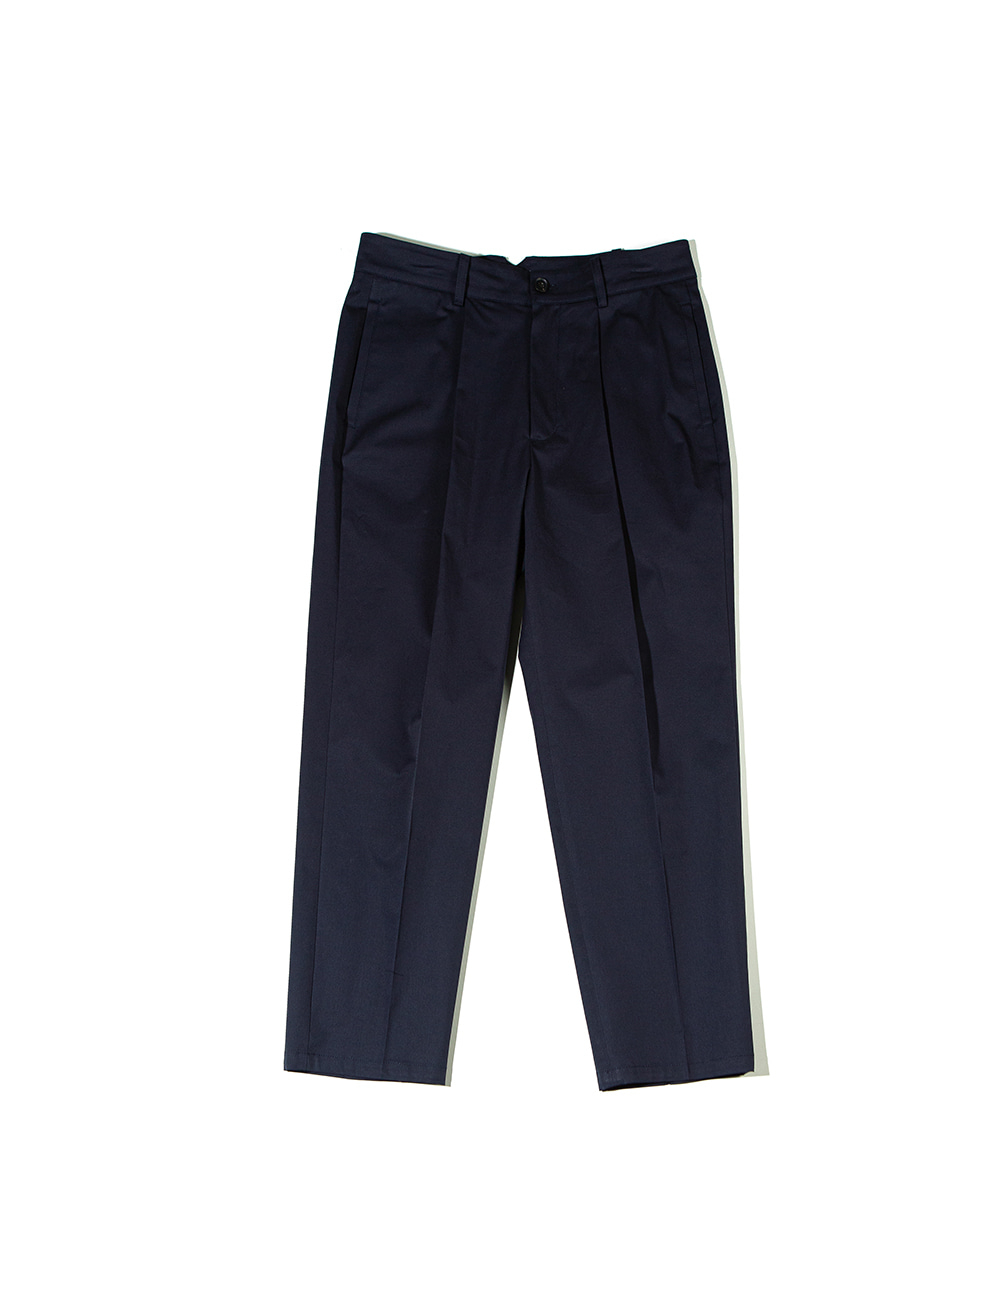 [Ourselves] SUPIMA COTTON TAPERED PANTS (dark navy)